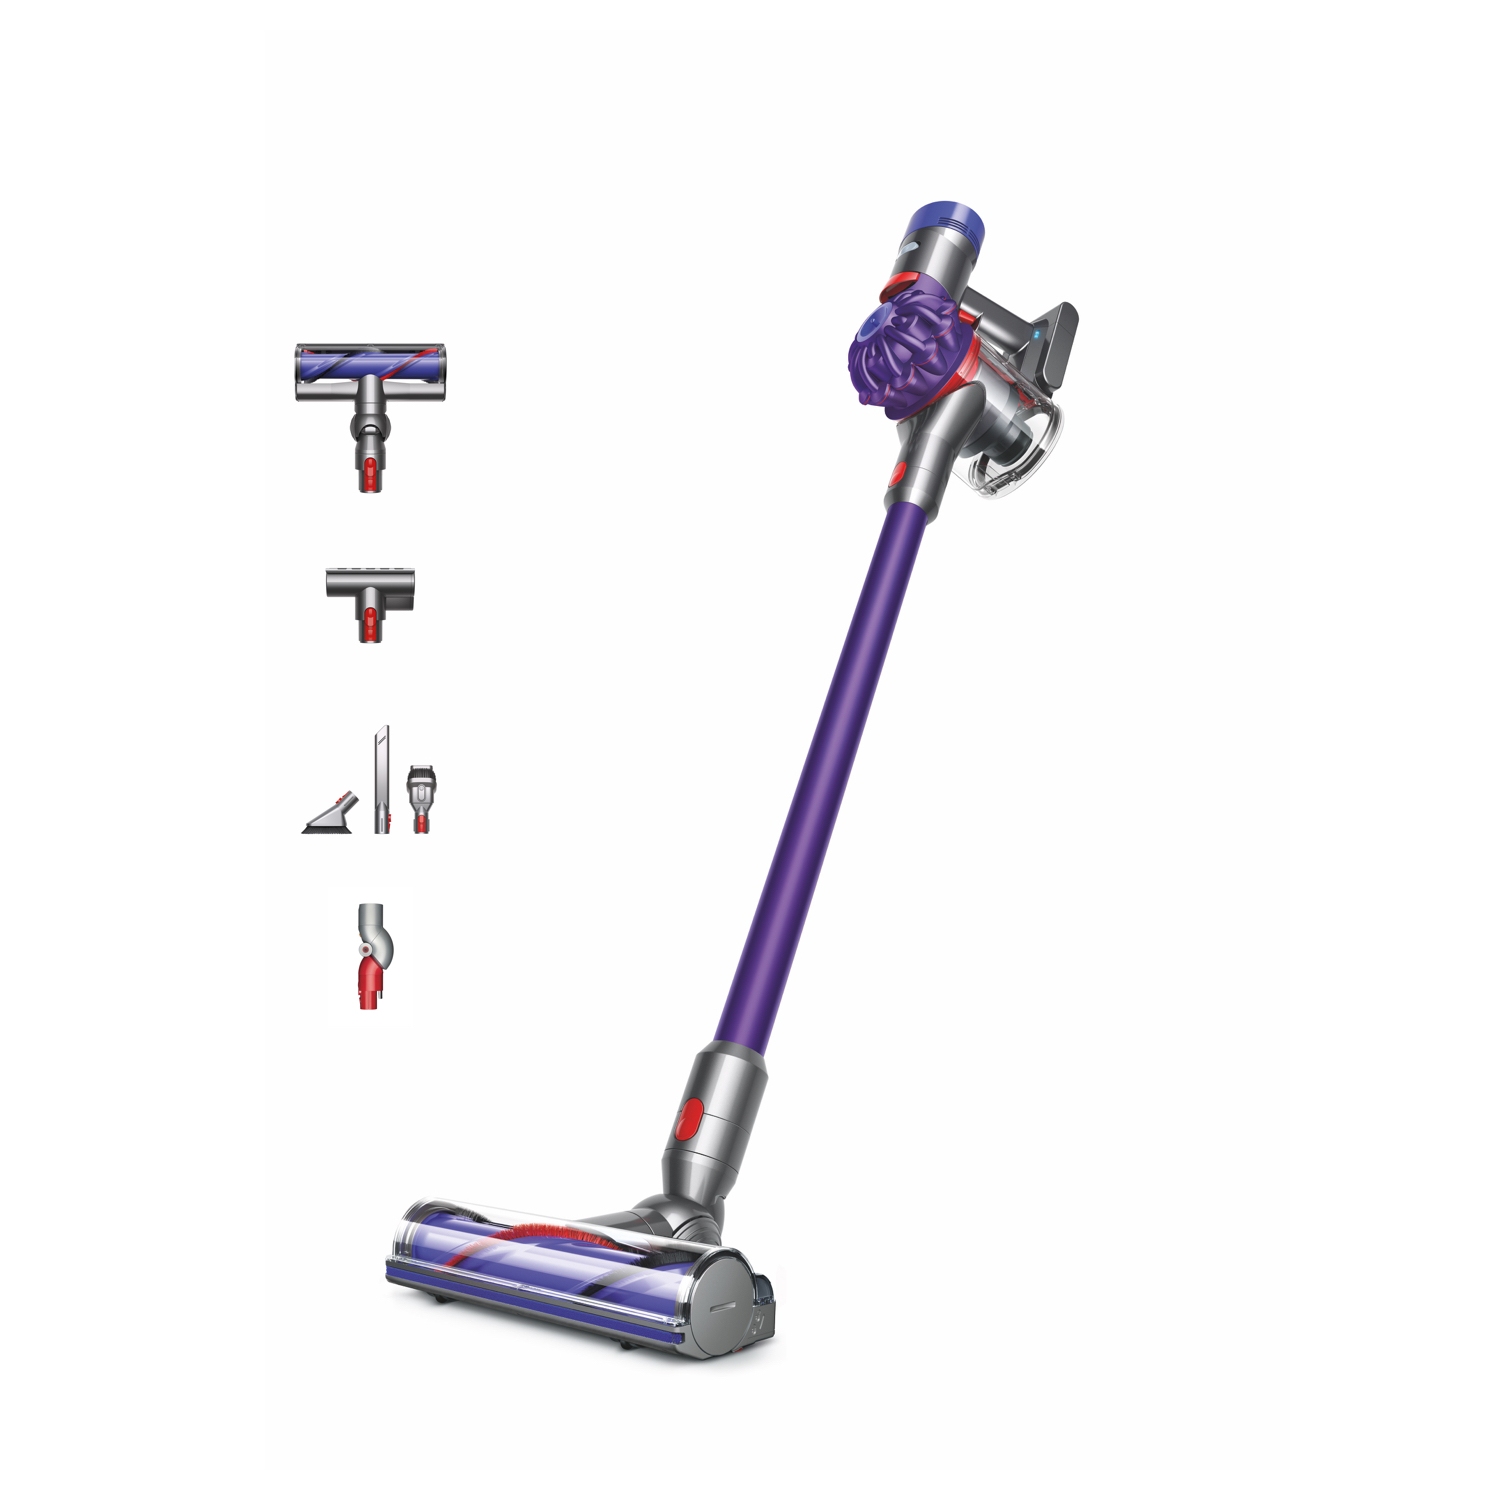 Dyson V7ANIMAL Cordless Vacuum Cleaner - 30 Minute Run Time with Complete Cleaning Kit - 0